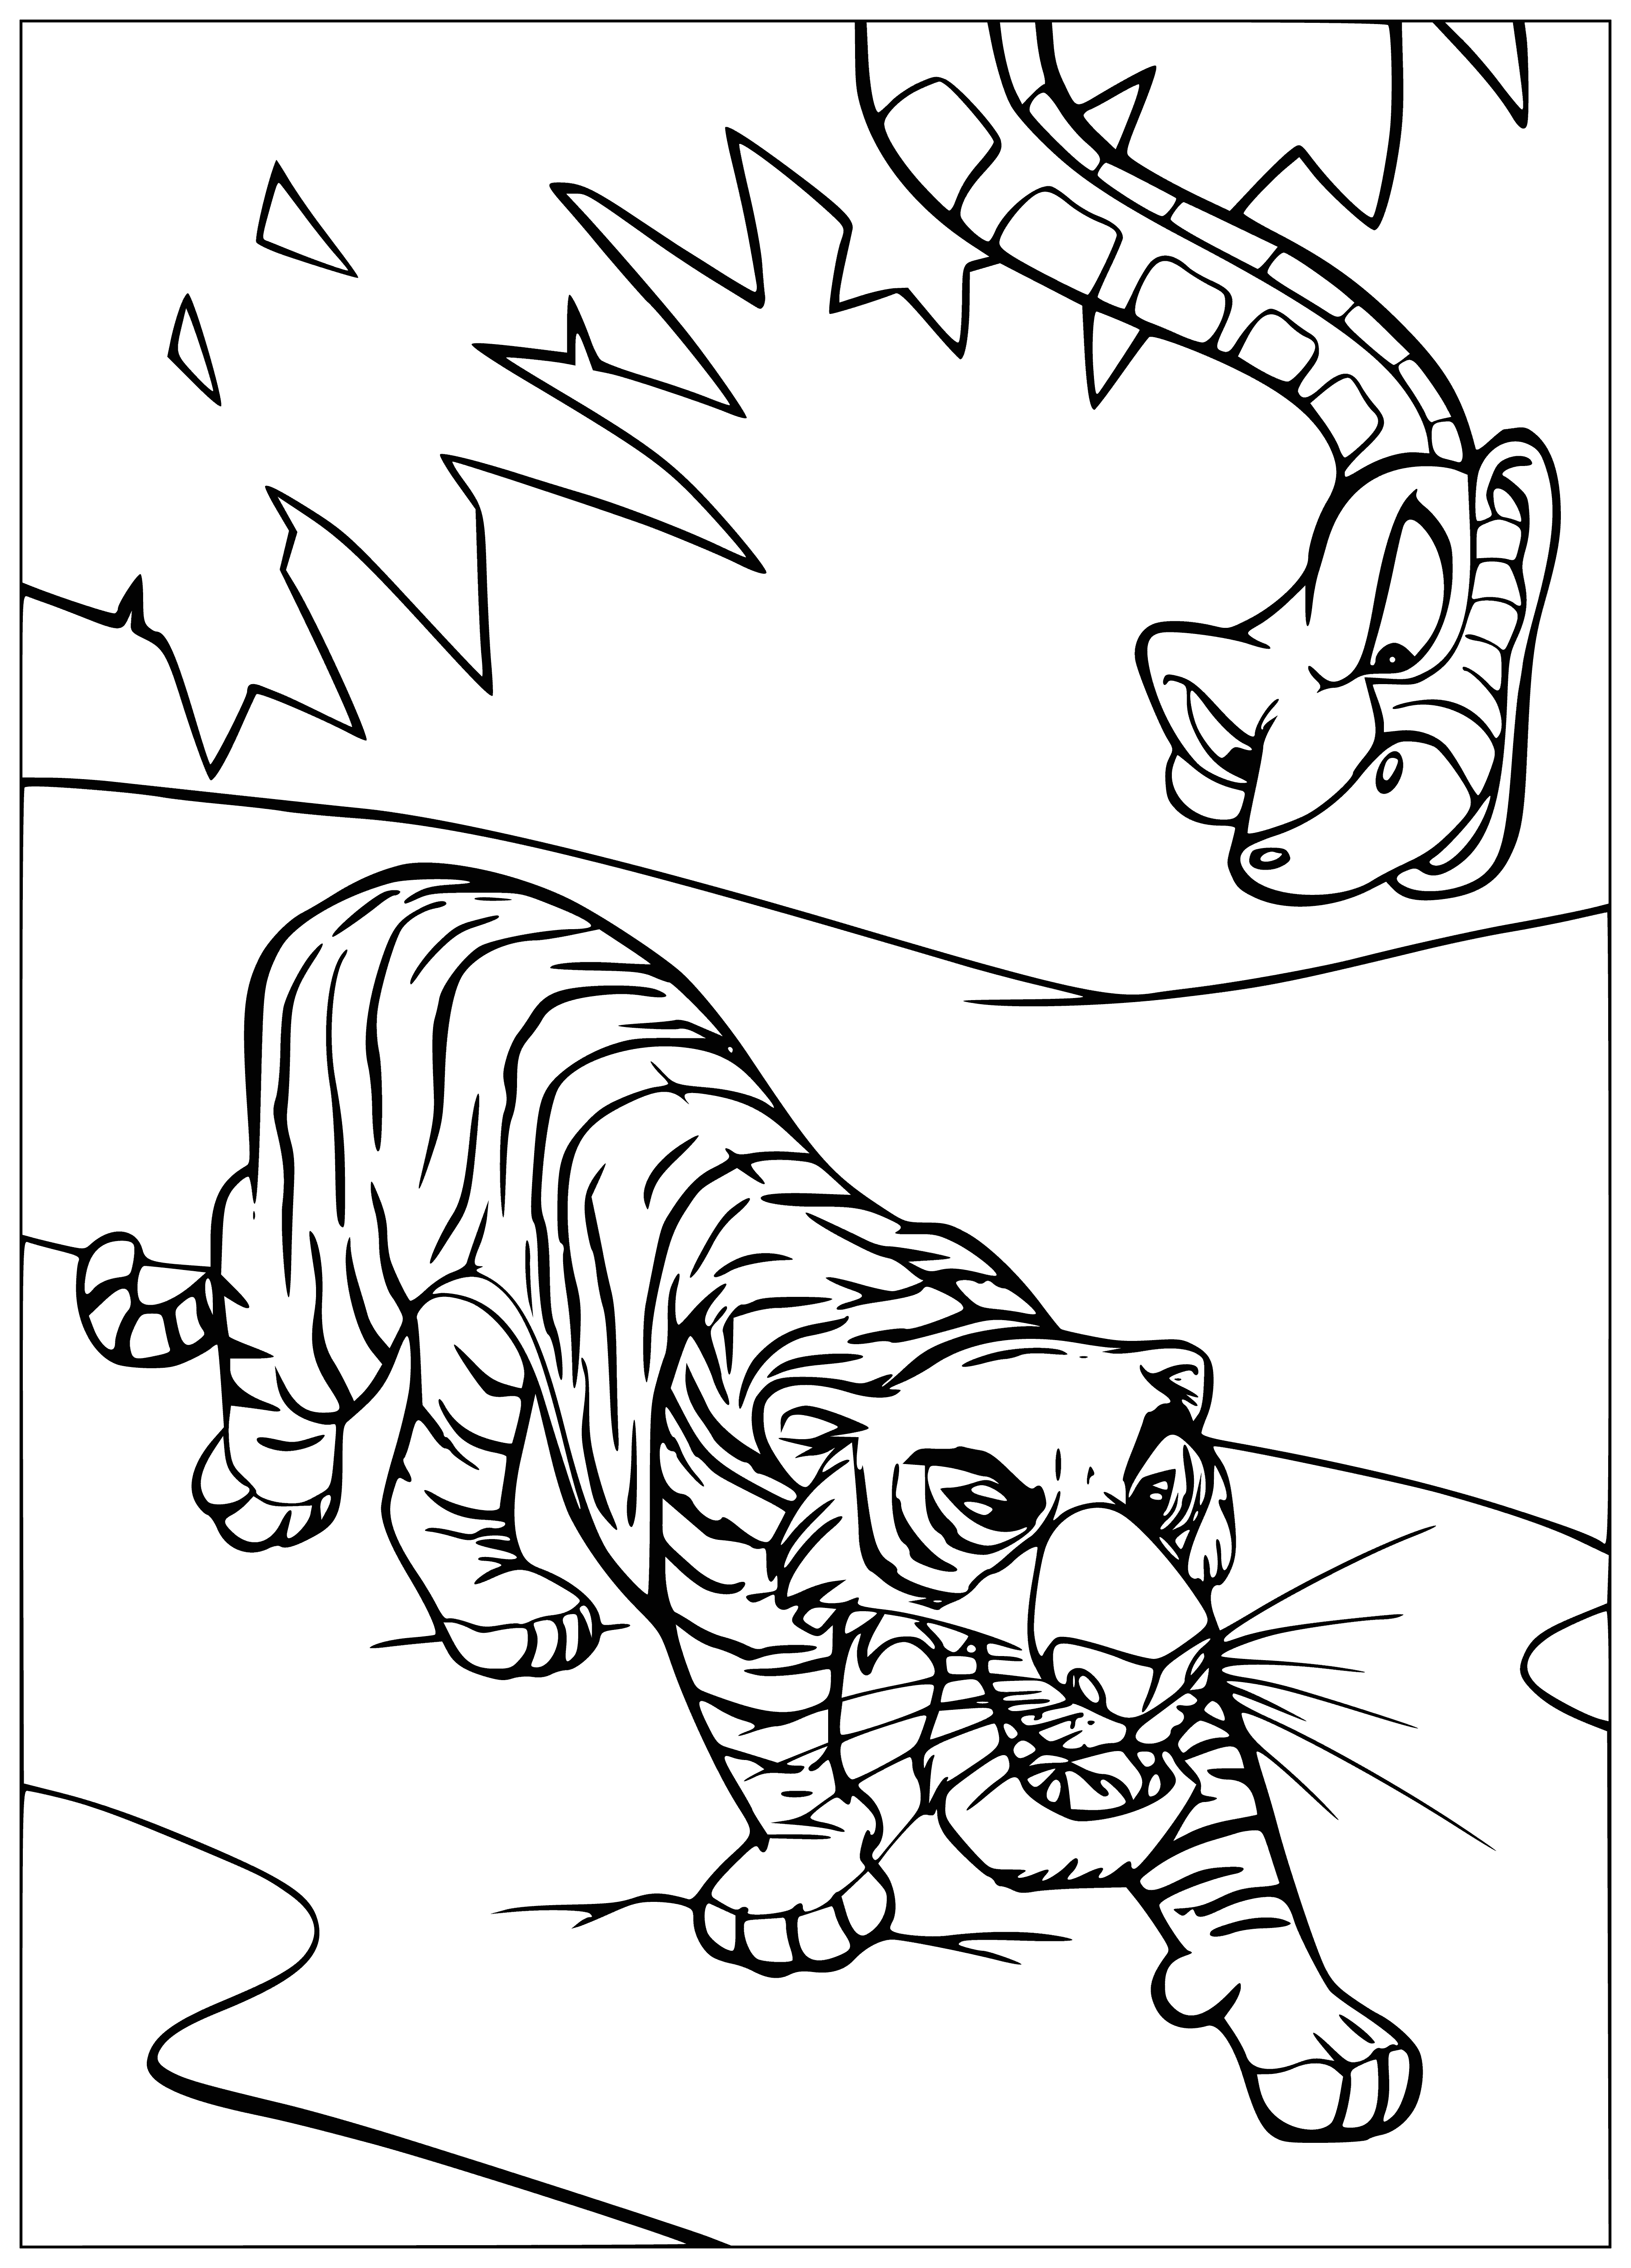 Sher Khan and Kaa coloring page